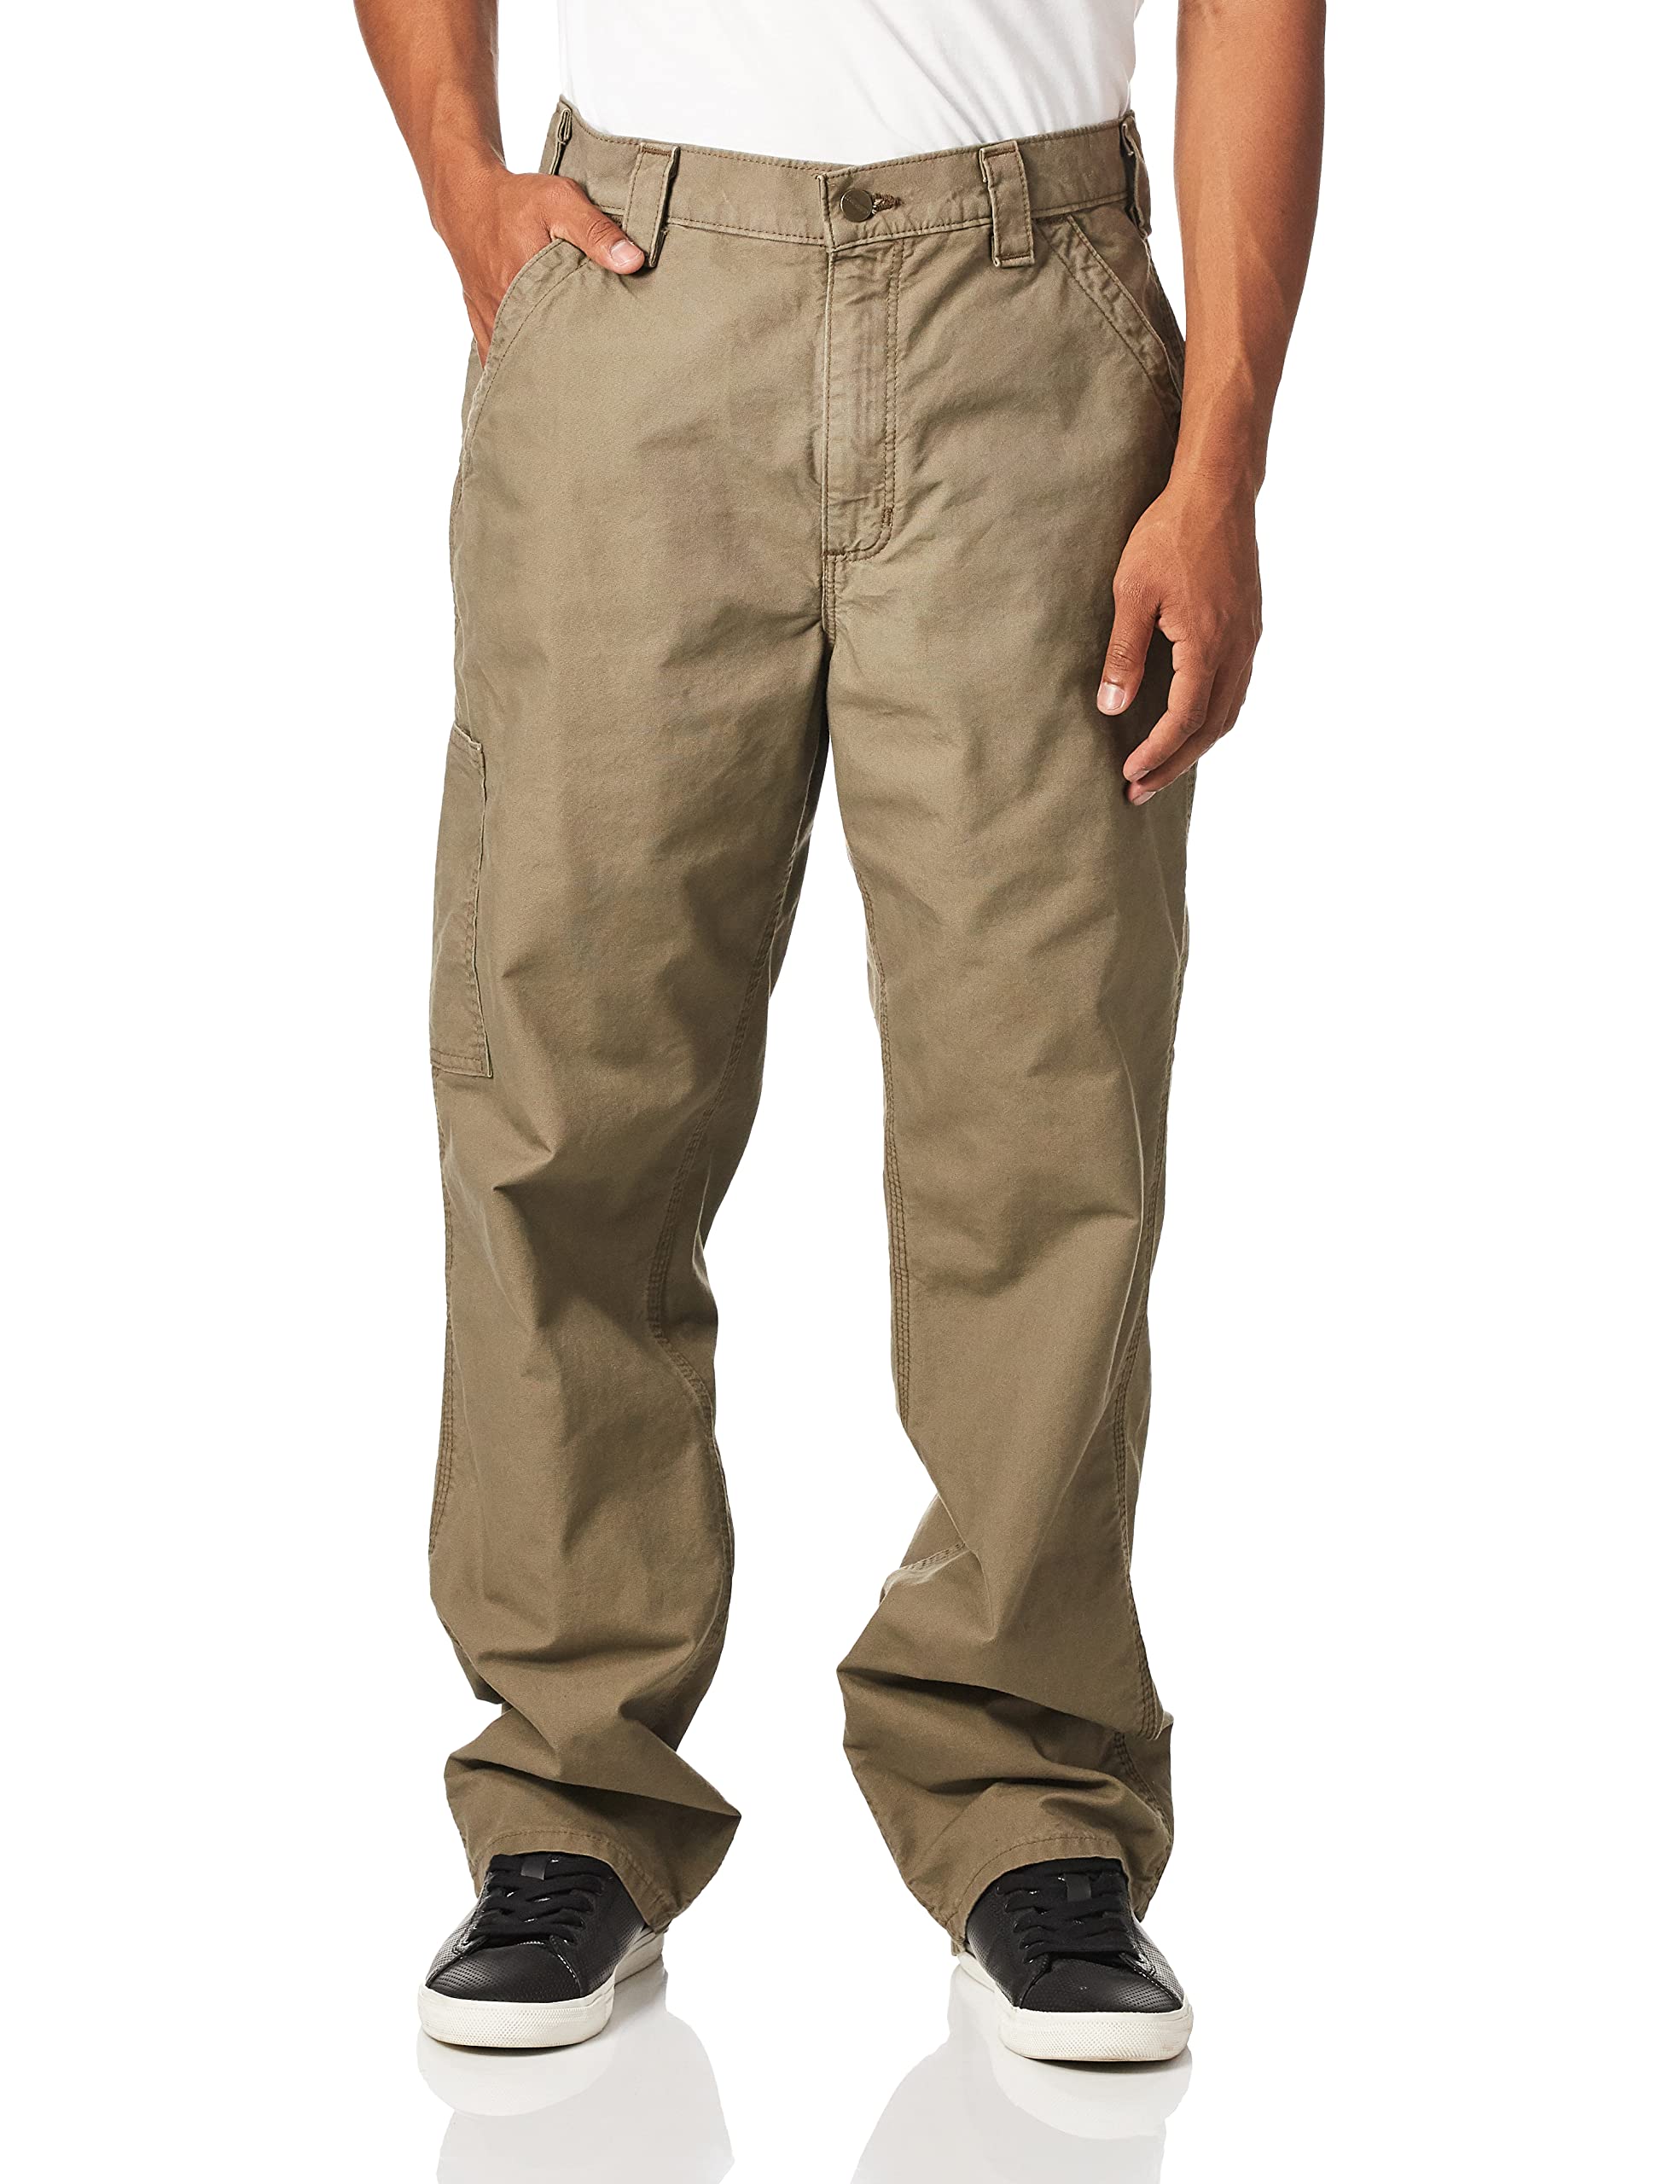 Carhartt Men's Loose Fit Canvas Utility Work Pant